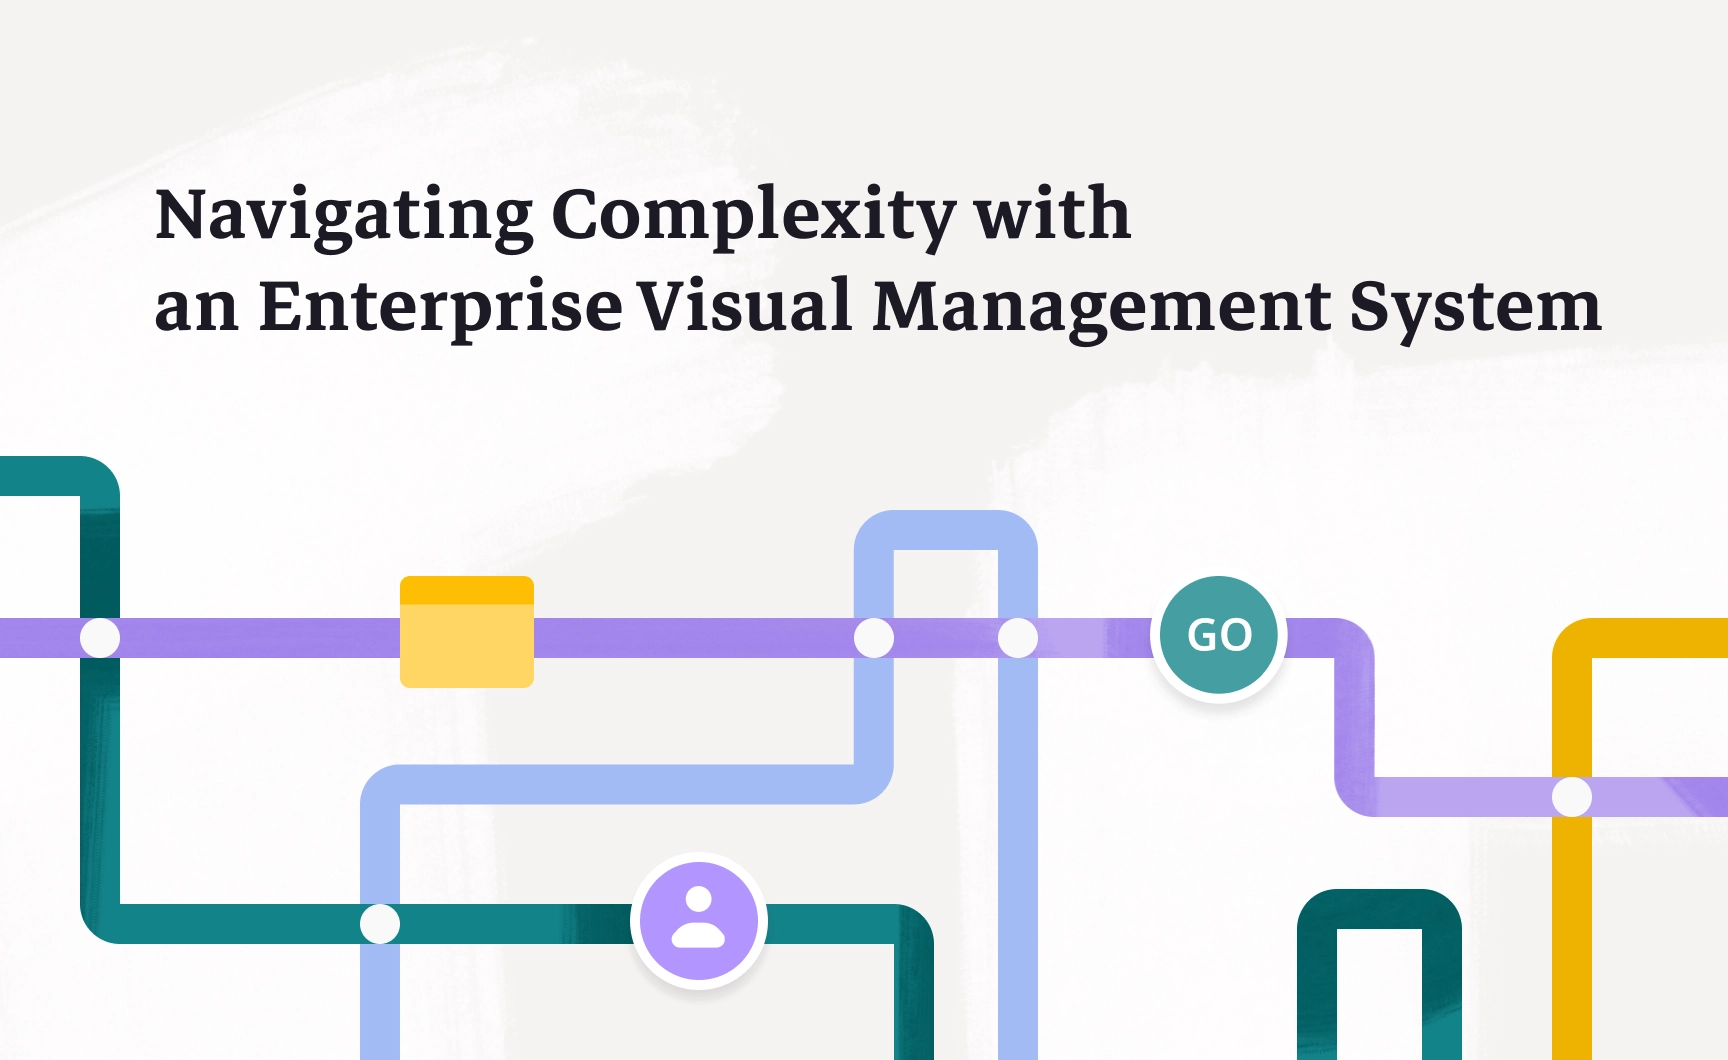 Image similar to a subway map with visuals from iObeya showing how an Enterprise Visual Management System can help organizations navigate complexity.